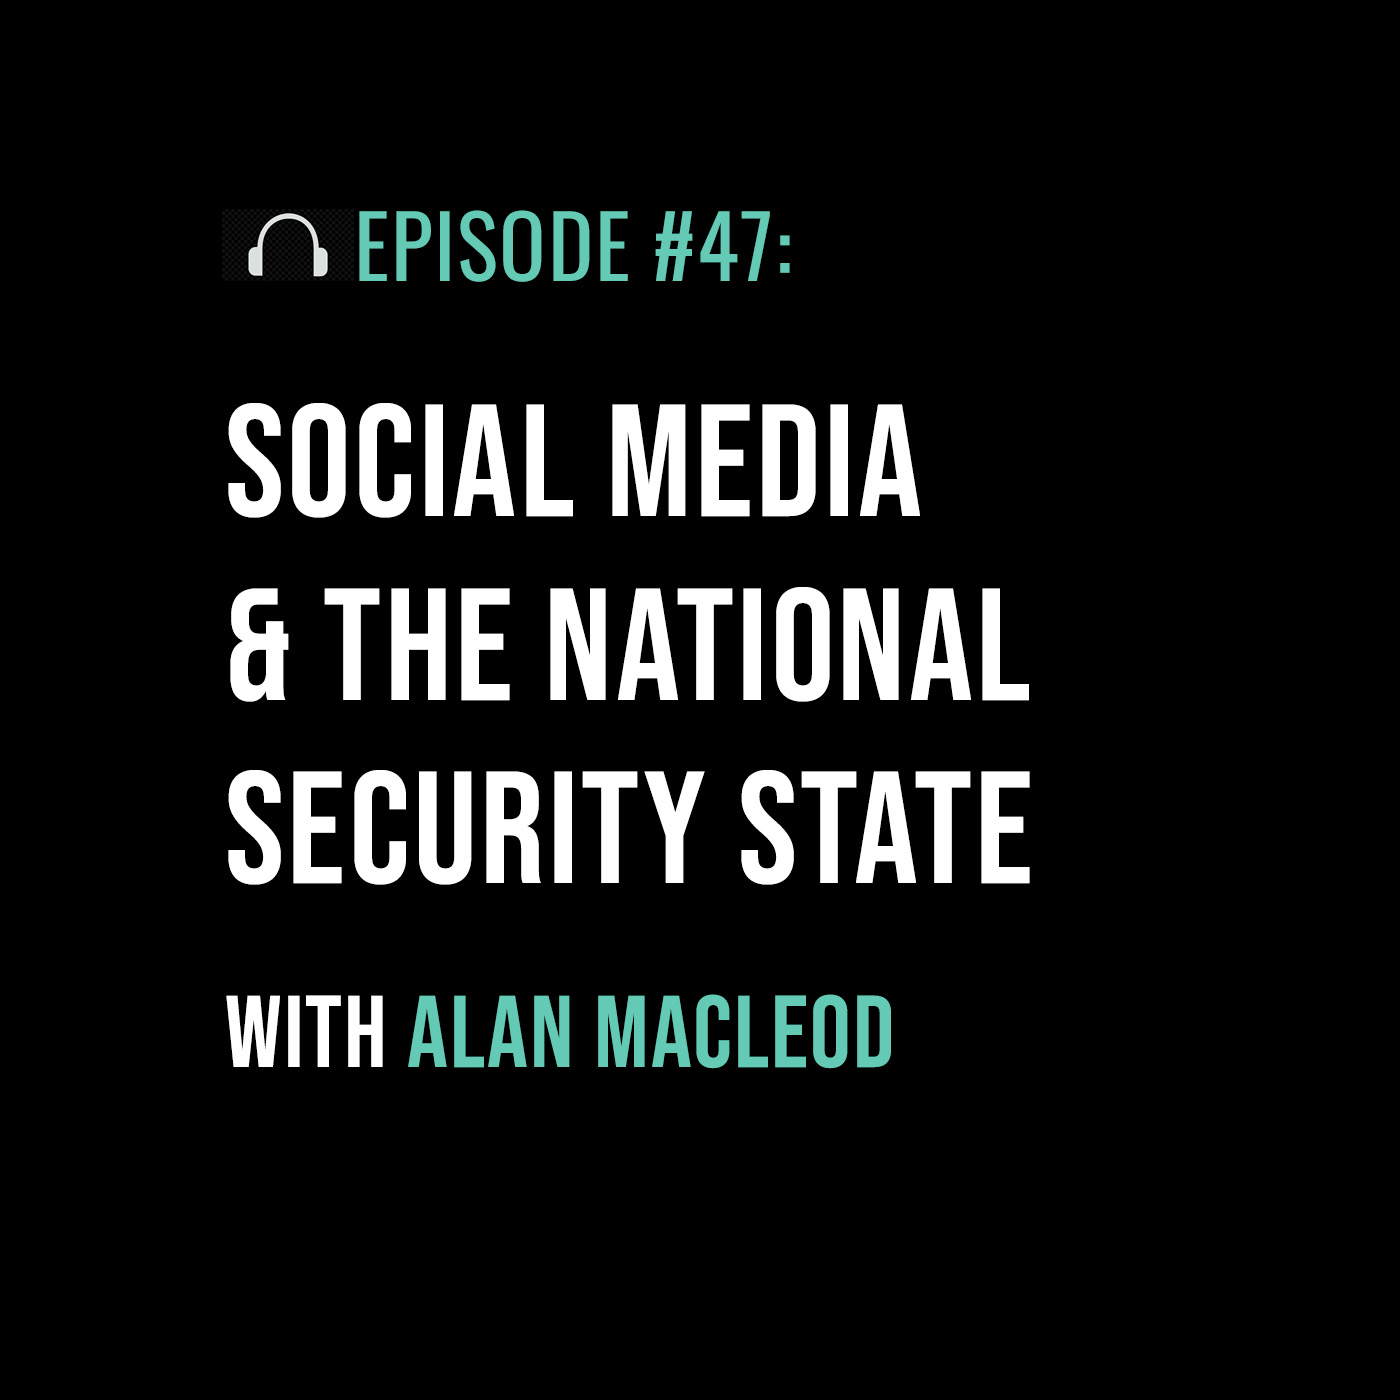 Social Media & the National Security State with Alan MacLeod